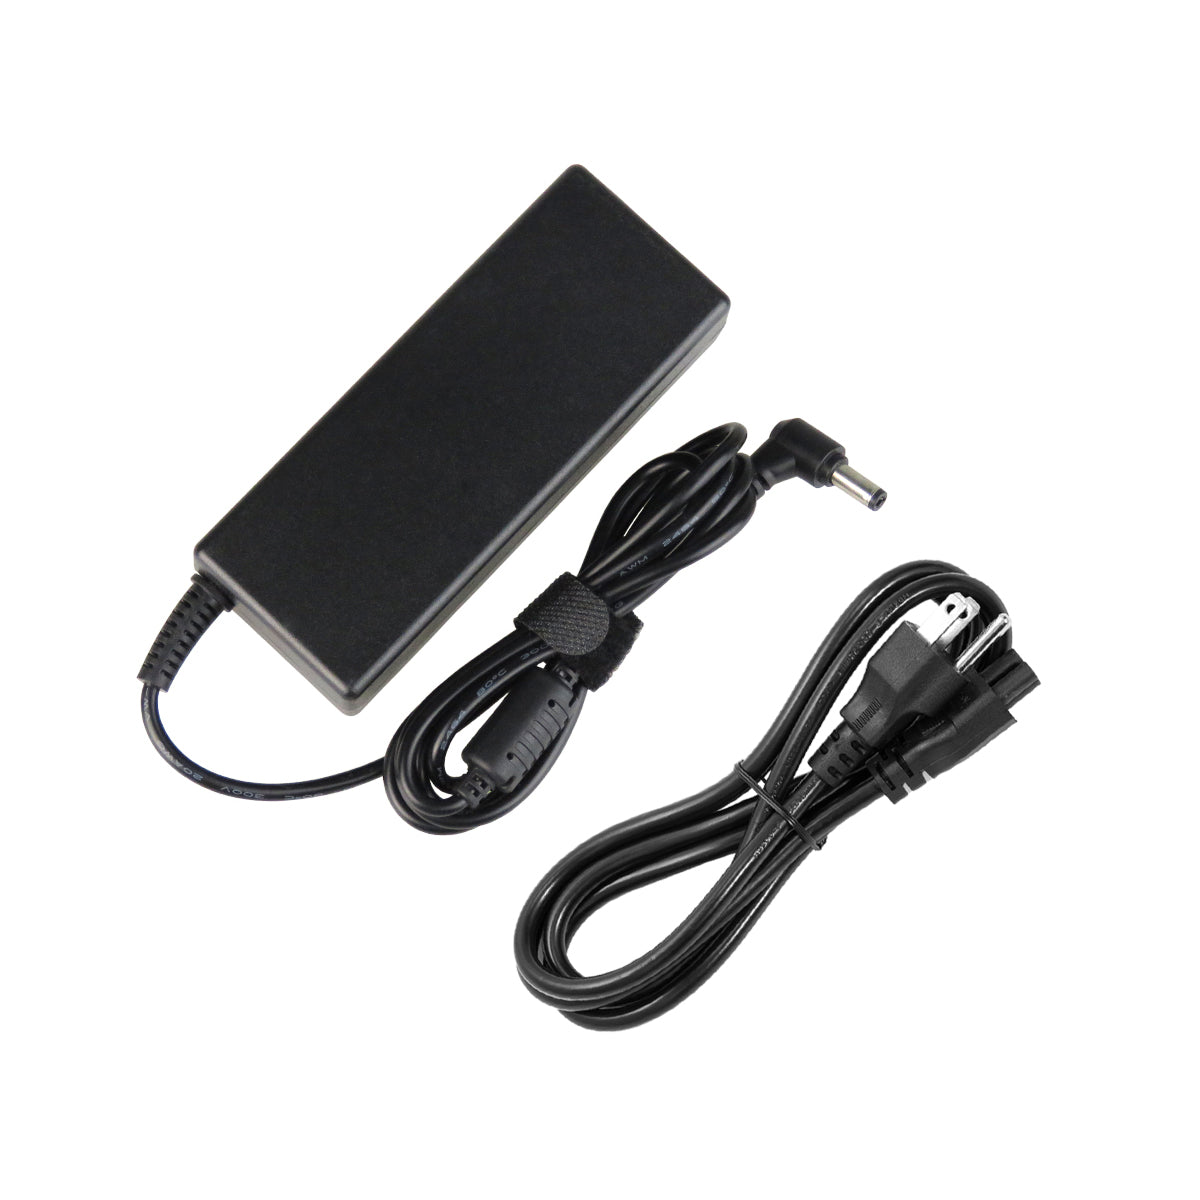 AC Adapter Charger for Gateway ML6714 Notebook.